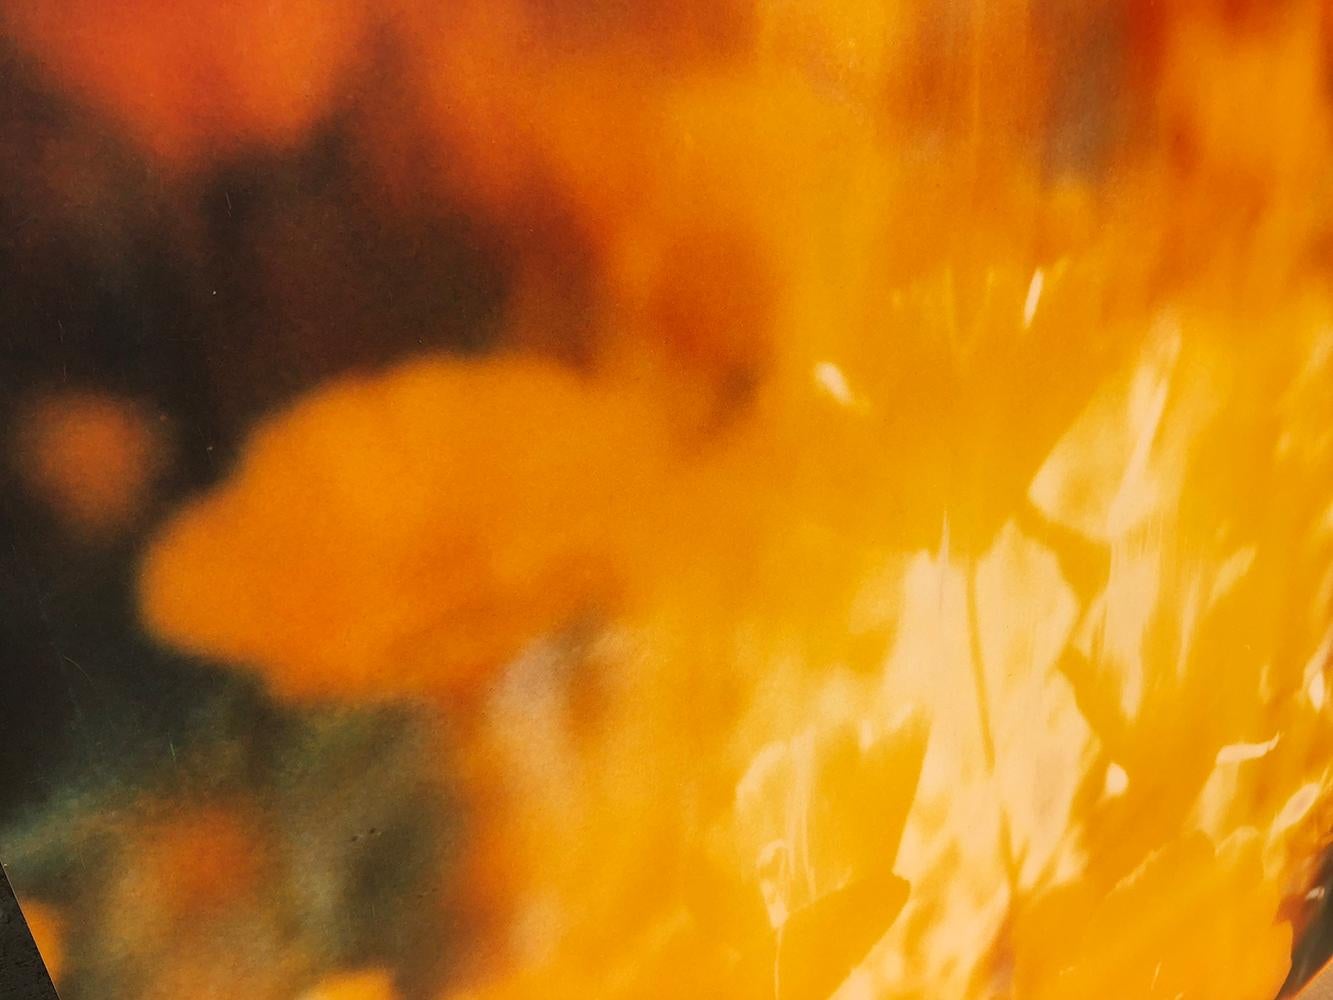 Yellow Flower (The Last Picture Show) - 2005

128x125cm,
Edition 4/5,
analog C-Print, hand-printed by the artist on Fuji Crystal Archive Paper, 
based on a Polaroid, Artist Inventory 672.04, 
Not mounted,  signature label and certificate.

(Photos